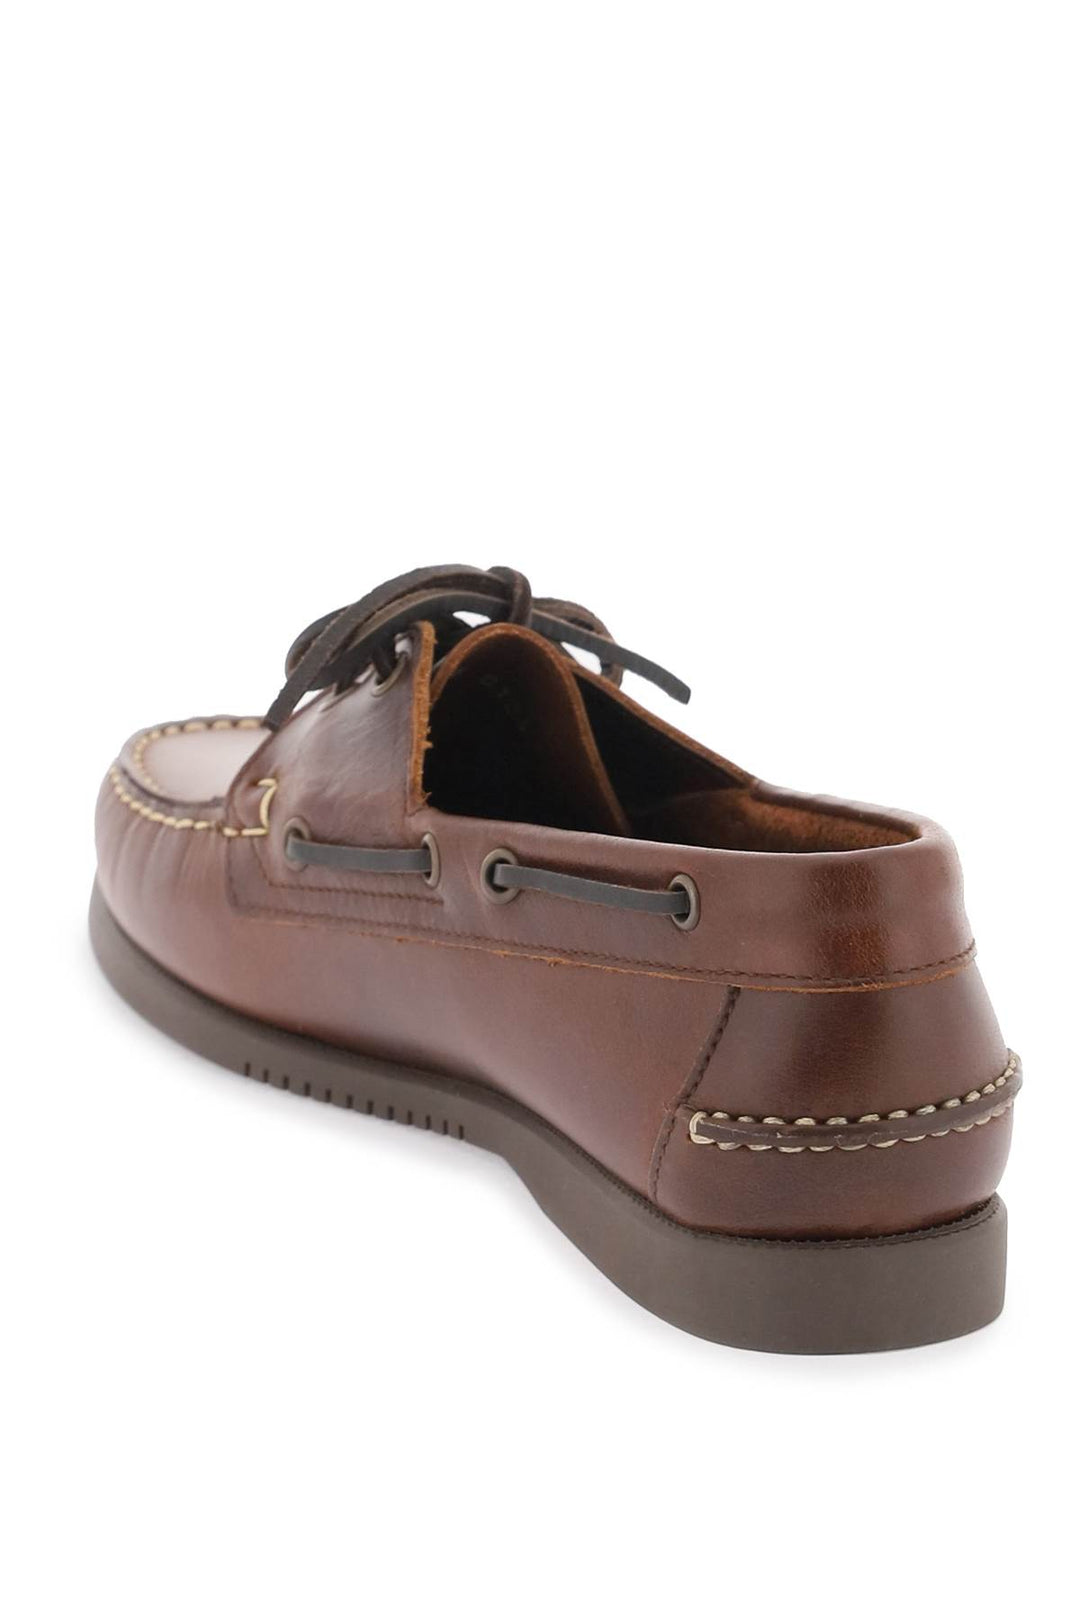 Paraboot Barth Loafers   Brown